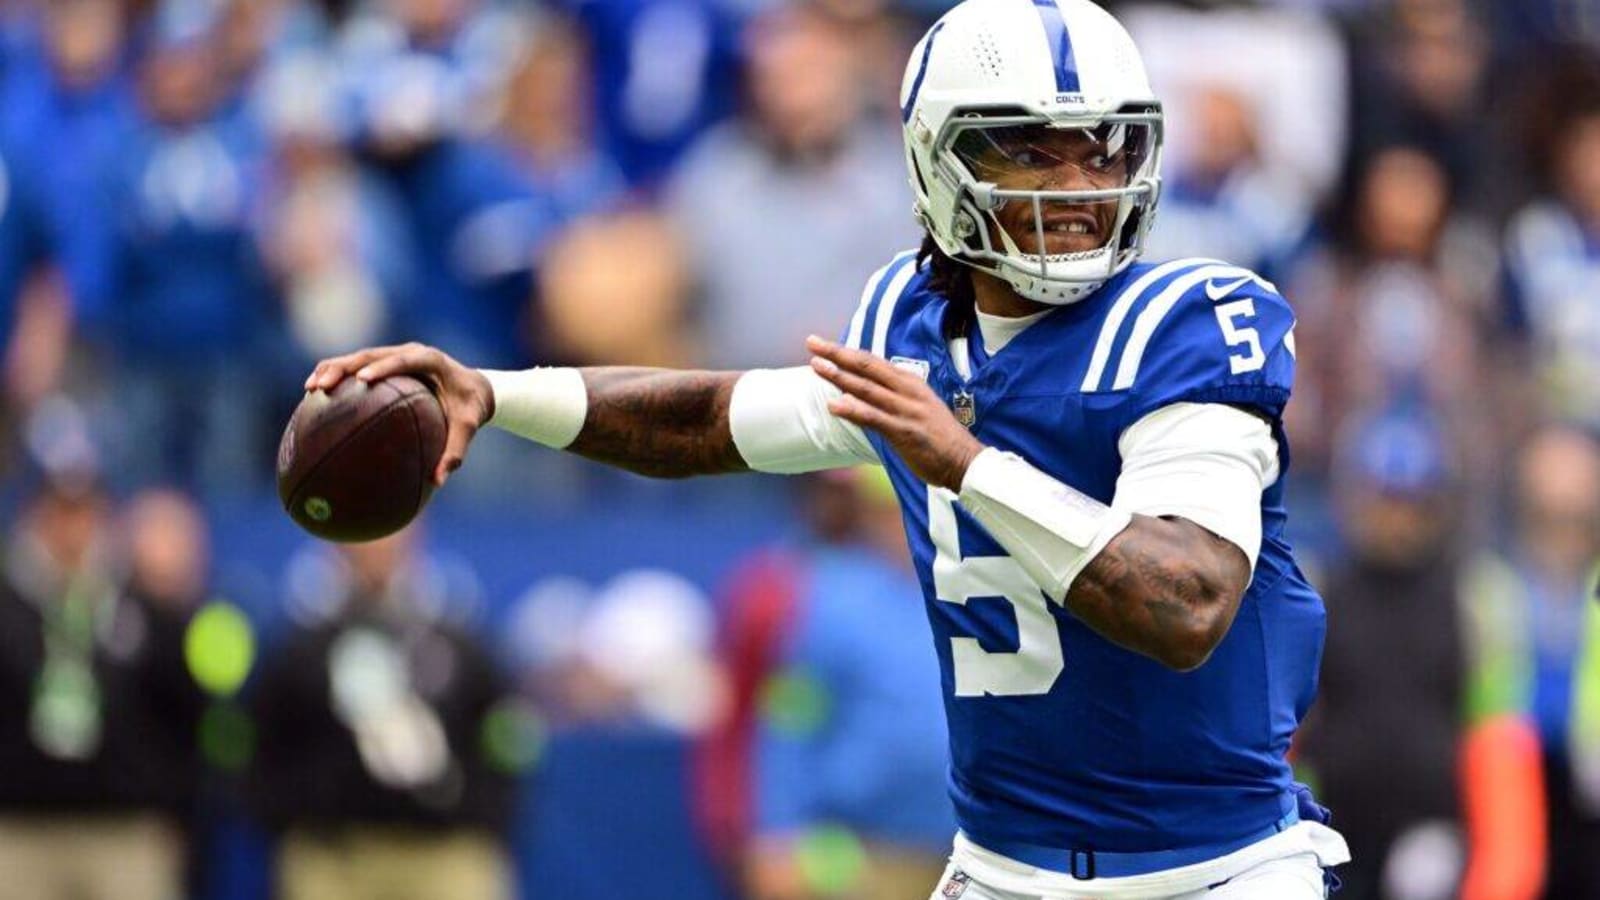 Week 3 on Colts Schedule May Be Battle of Two Future Elite QBs